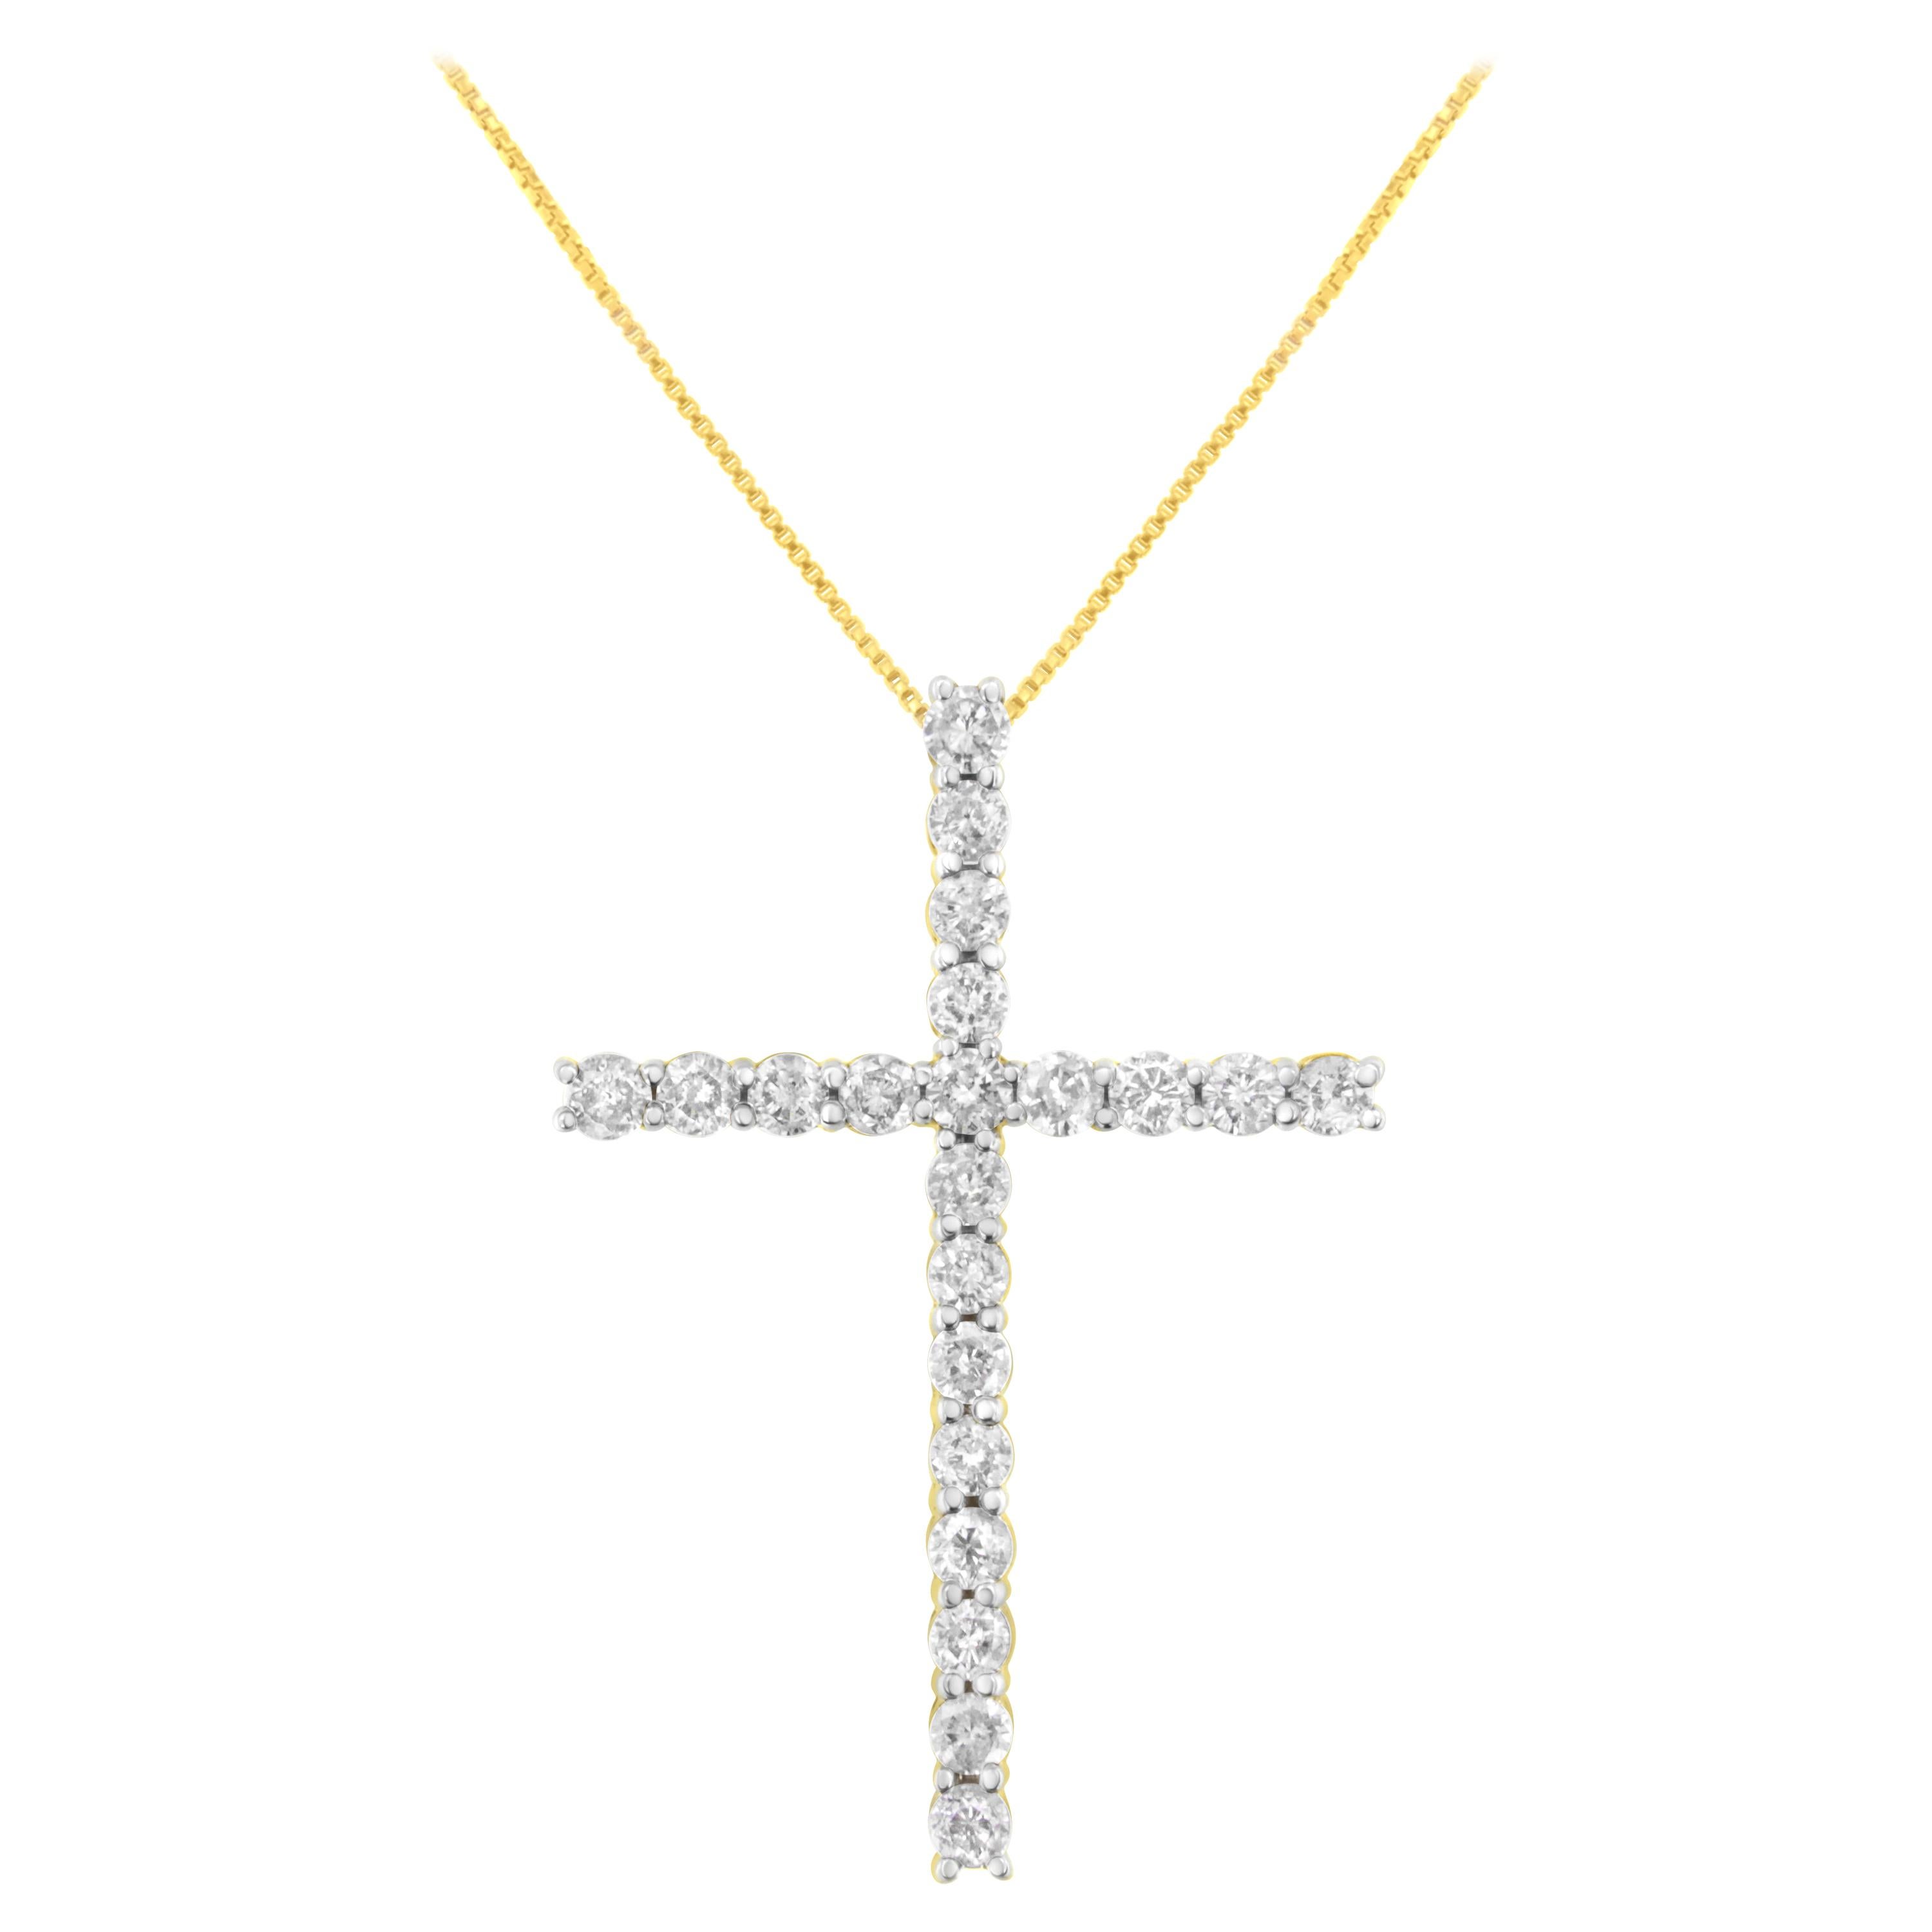 Yellow Gold Plated Sterling Silver 4.0 Carat Diamond Cross Pendant Necklace For Sale